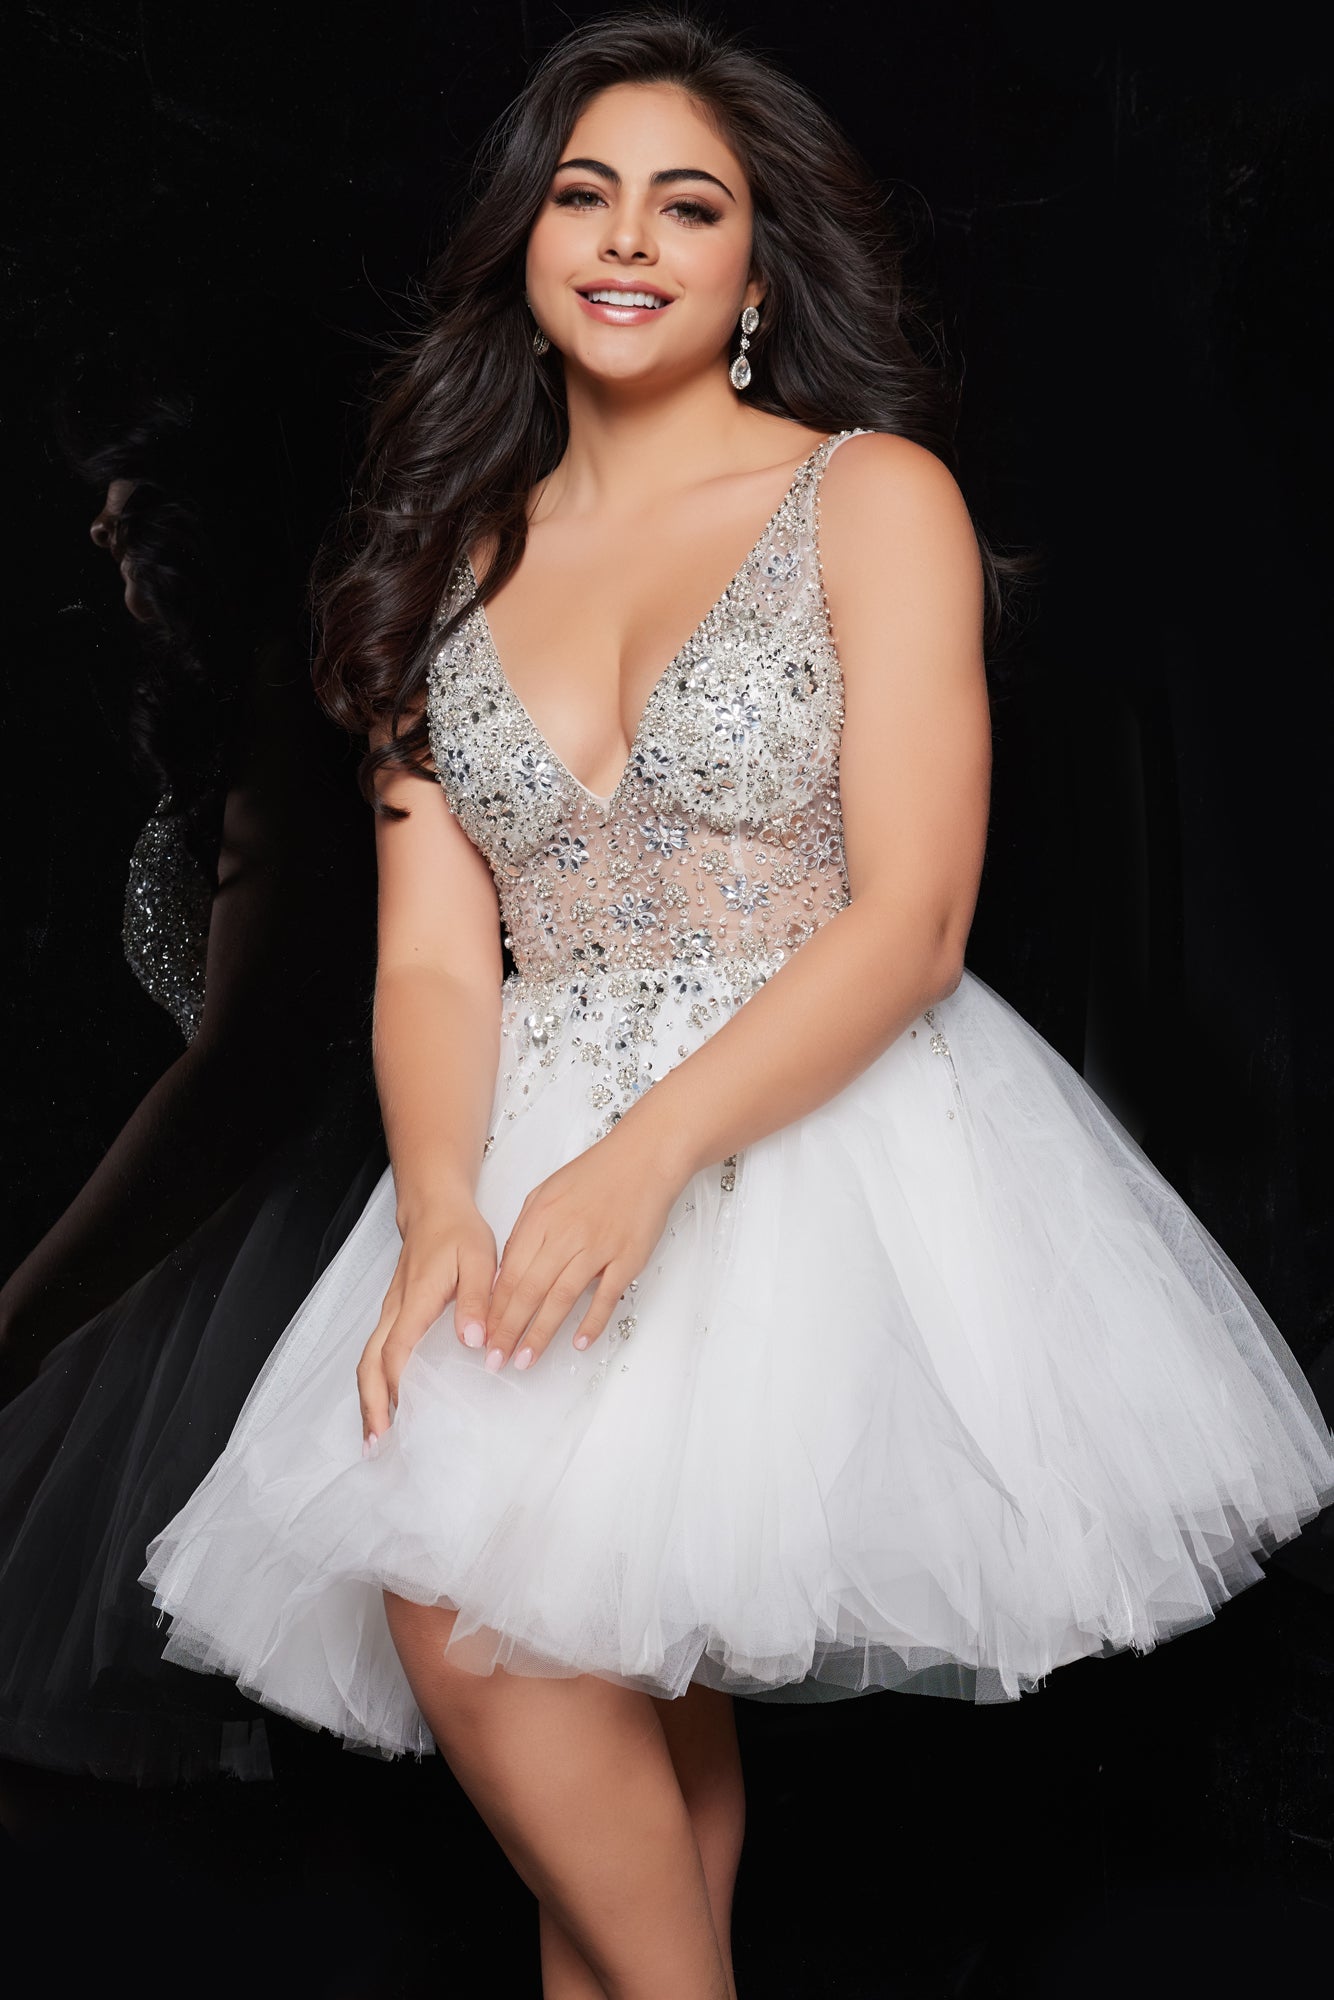 Jovani 1774 Fit and Flare Short Beaded Tulle Dress